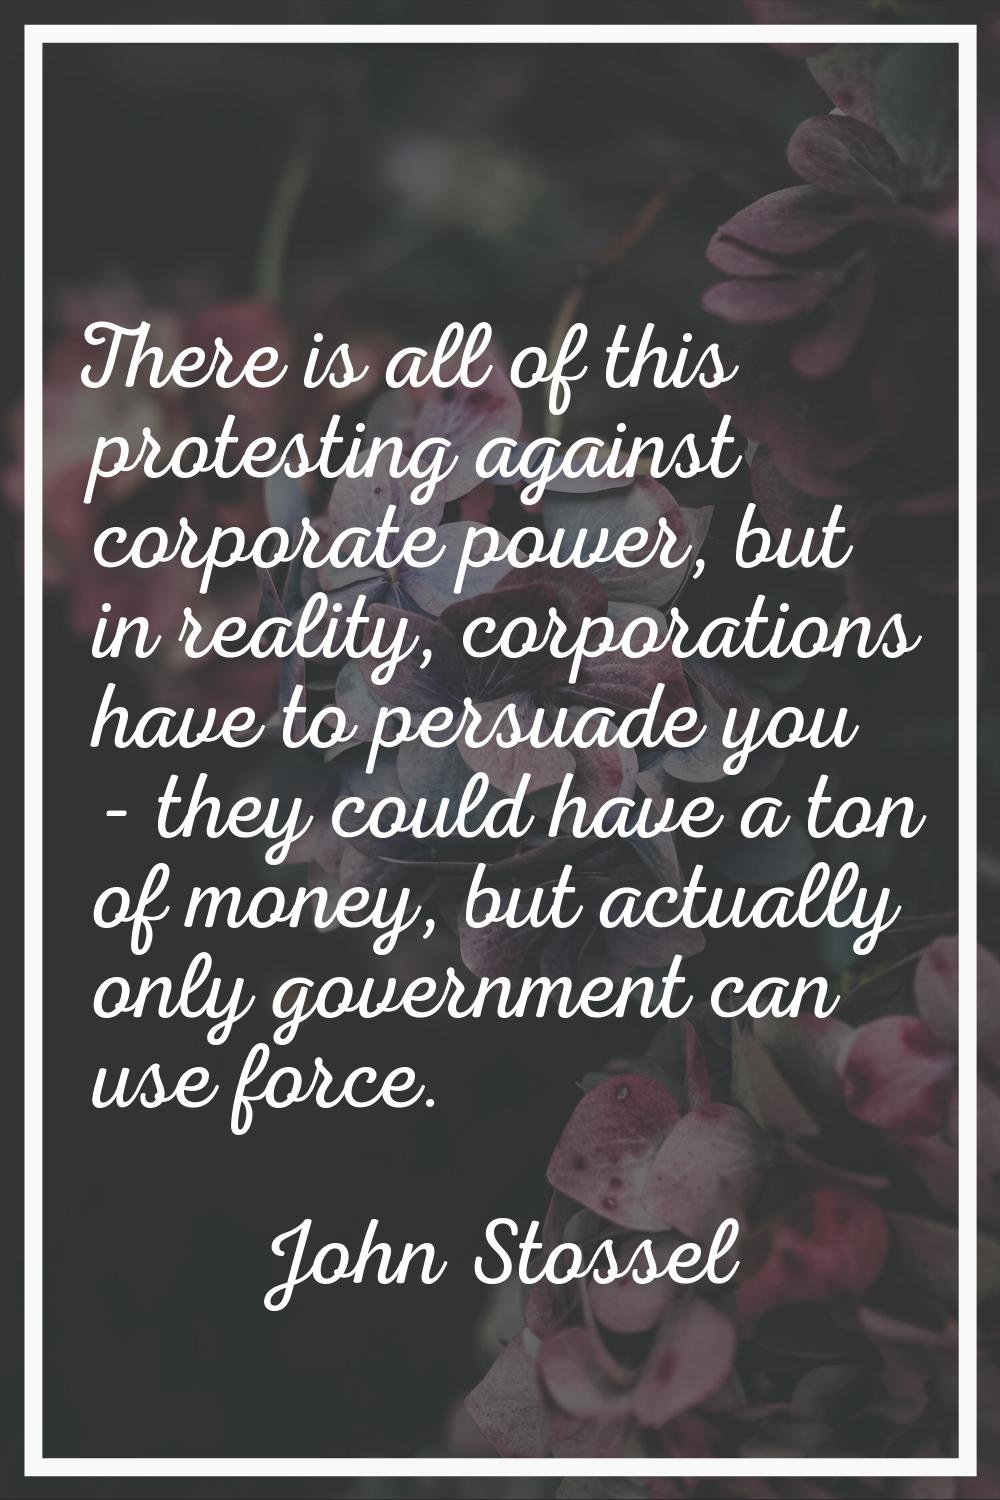 There is all of this protesting against corporate power, but in reality, corporations have to persu